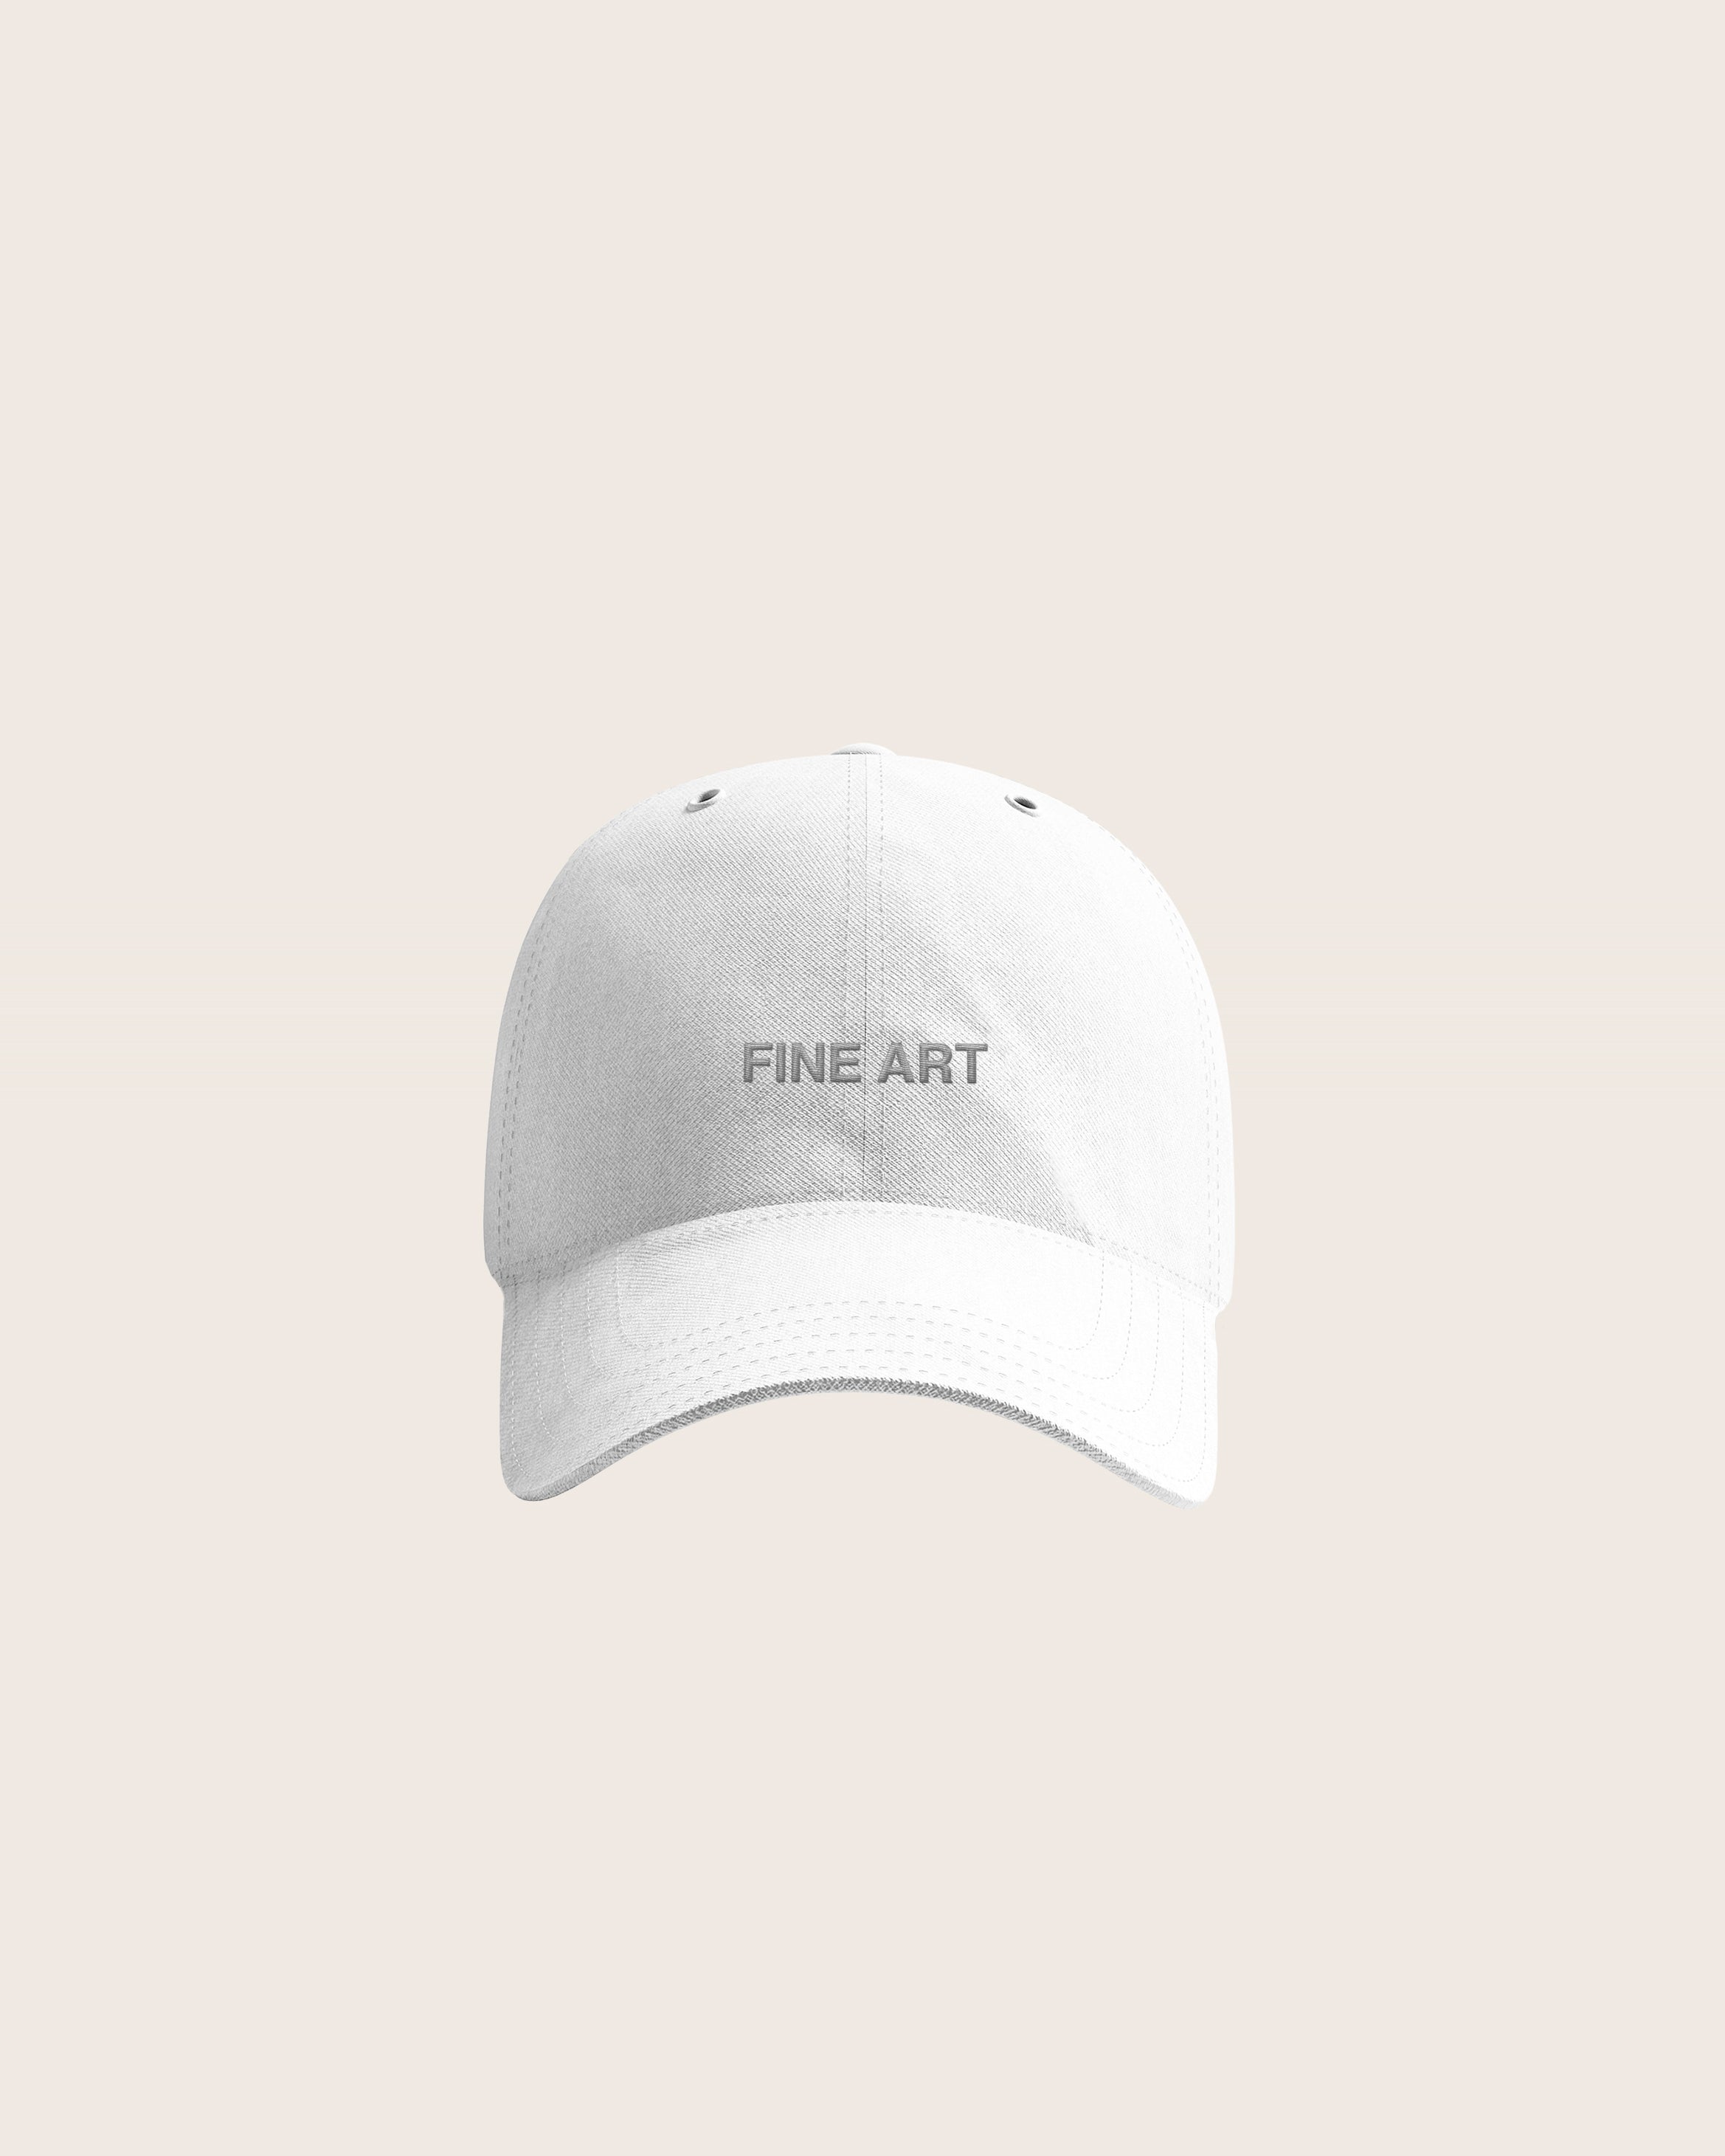 White Baseball Cap / Dad Hat with Fine Art Movement Silver Text Embroidery on Front. 100% Cotton.